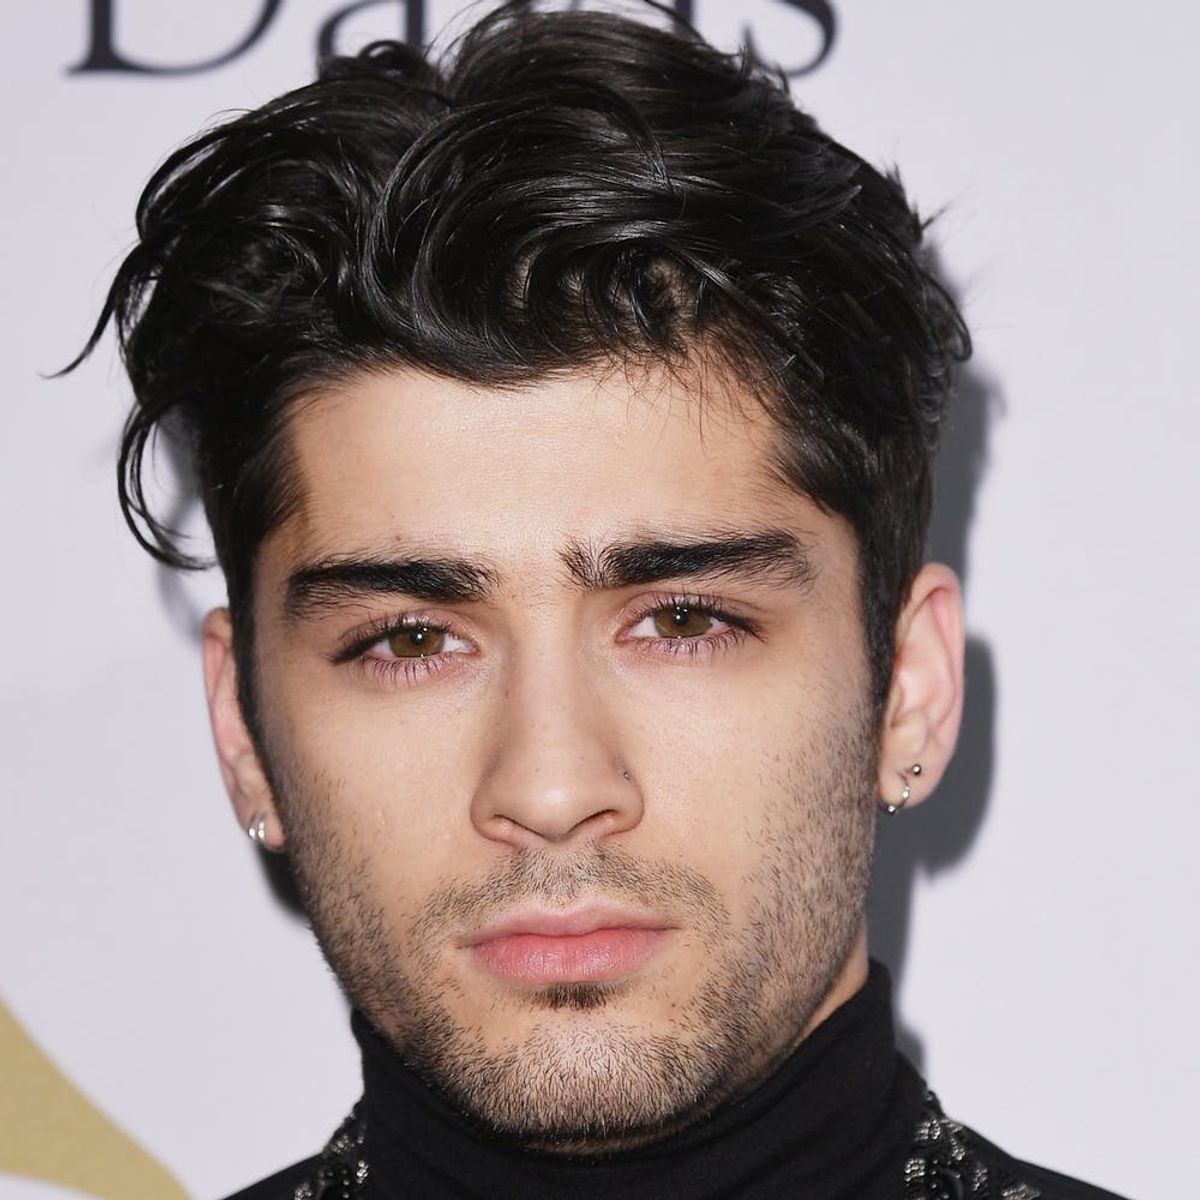 Zayn Malik Opens Up to Vogue About His Issues With Anxiety - Brit + Co